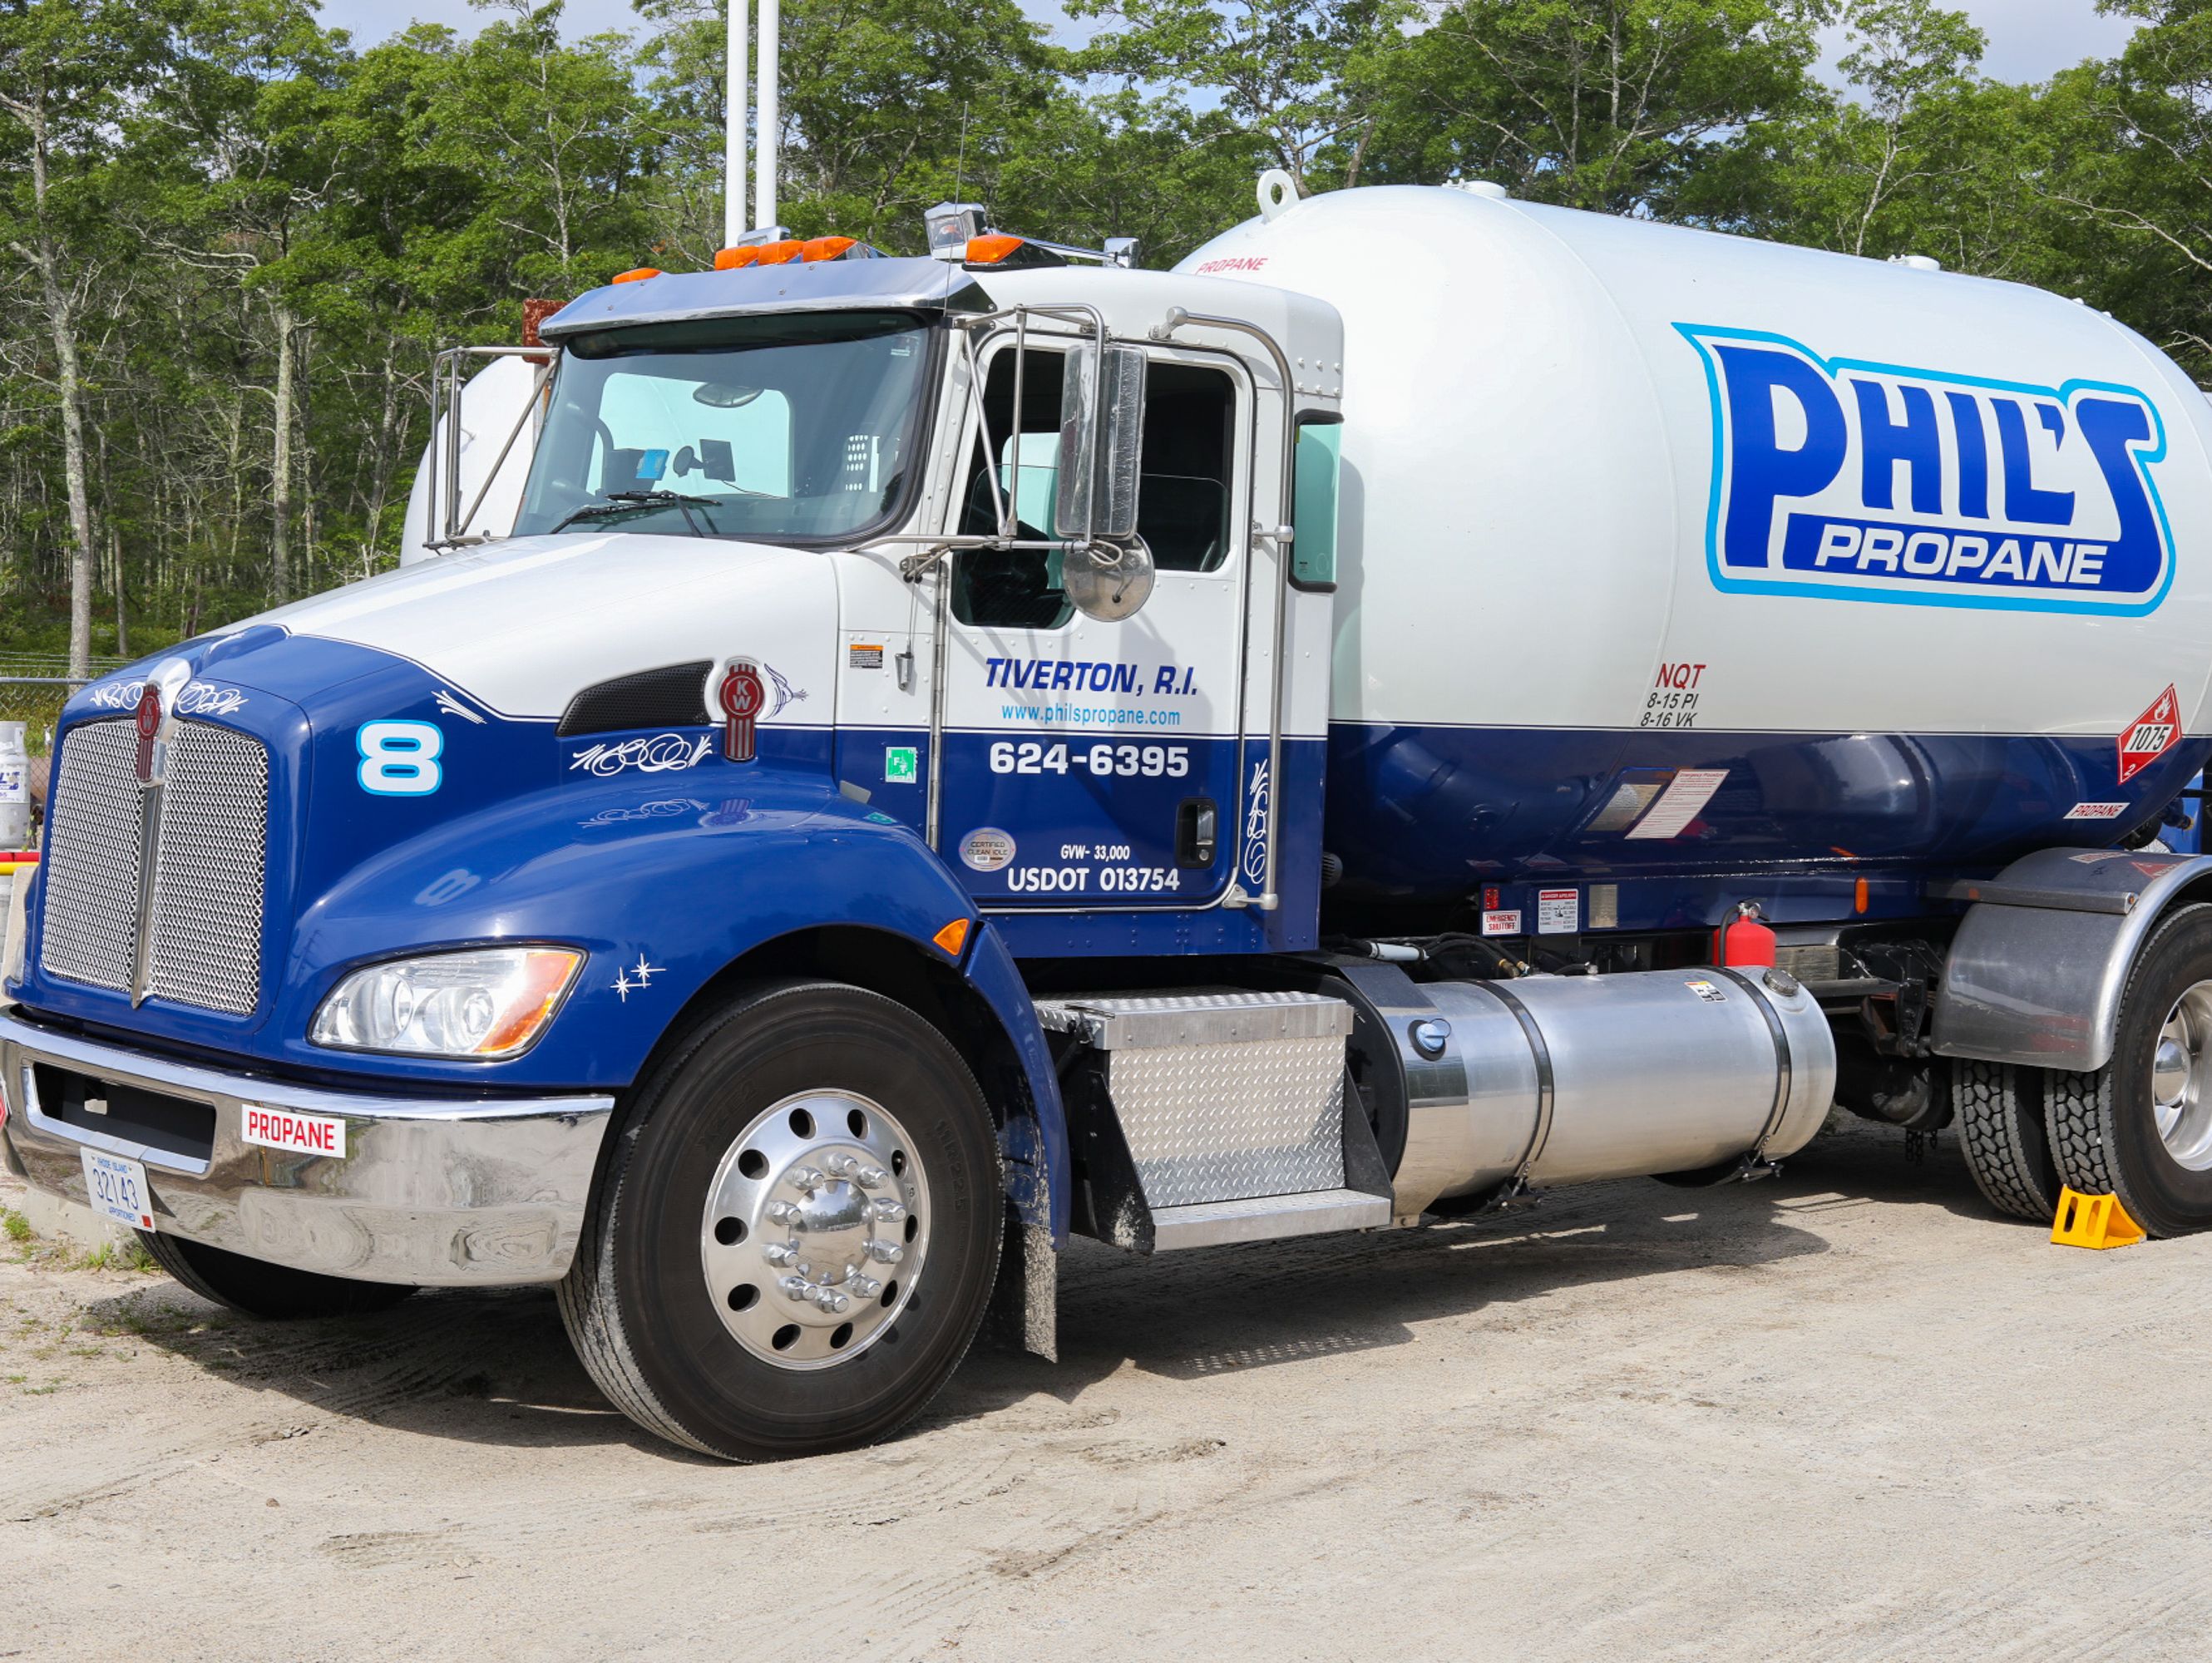 Phil's Propane delivery truck